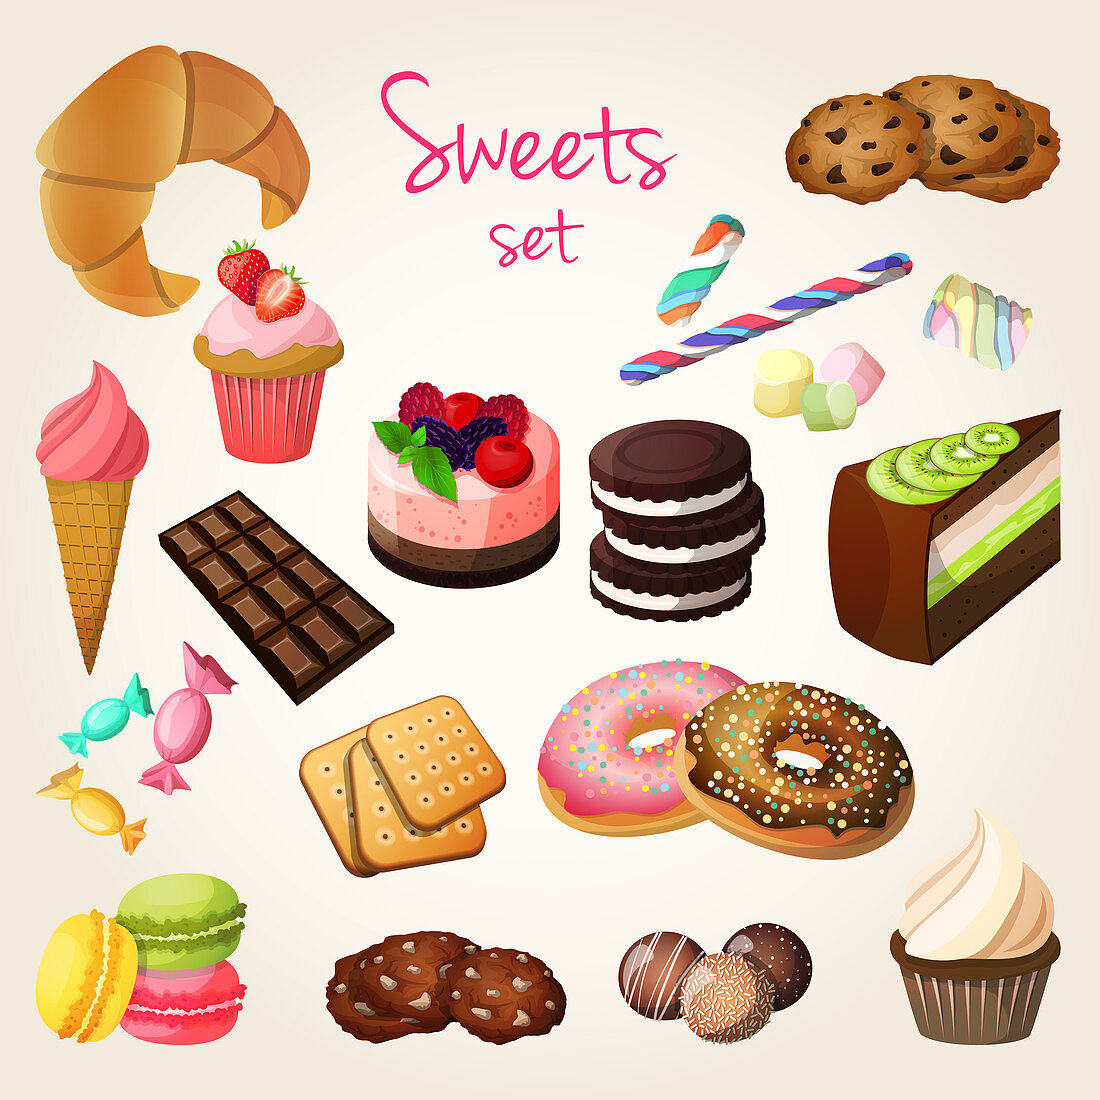 Cakes and sweets, illustration